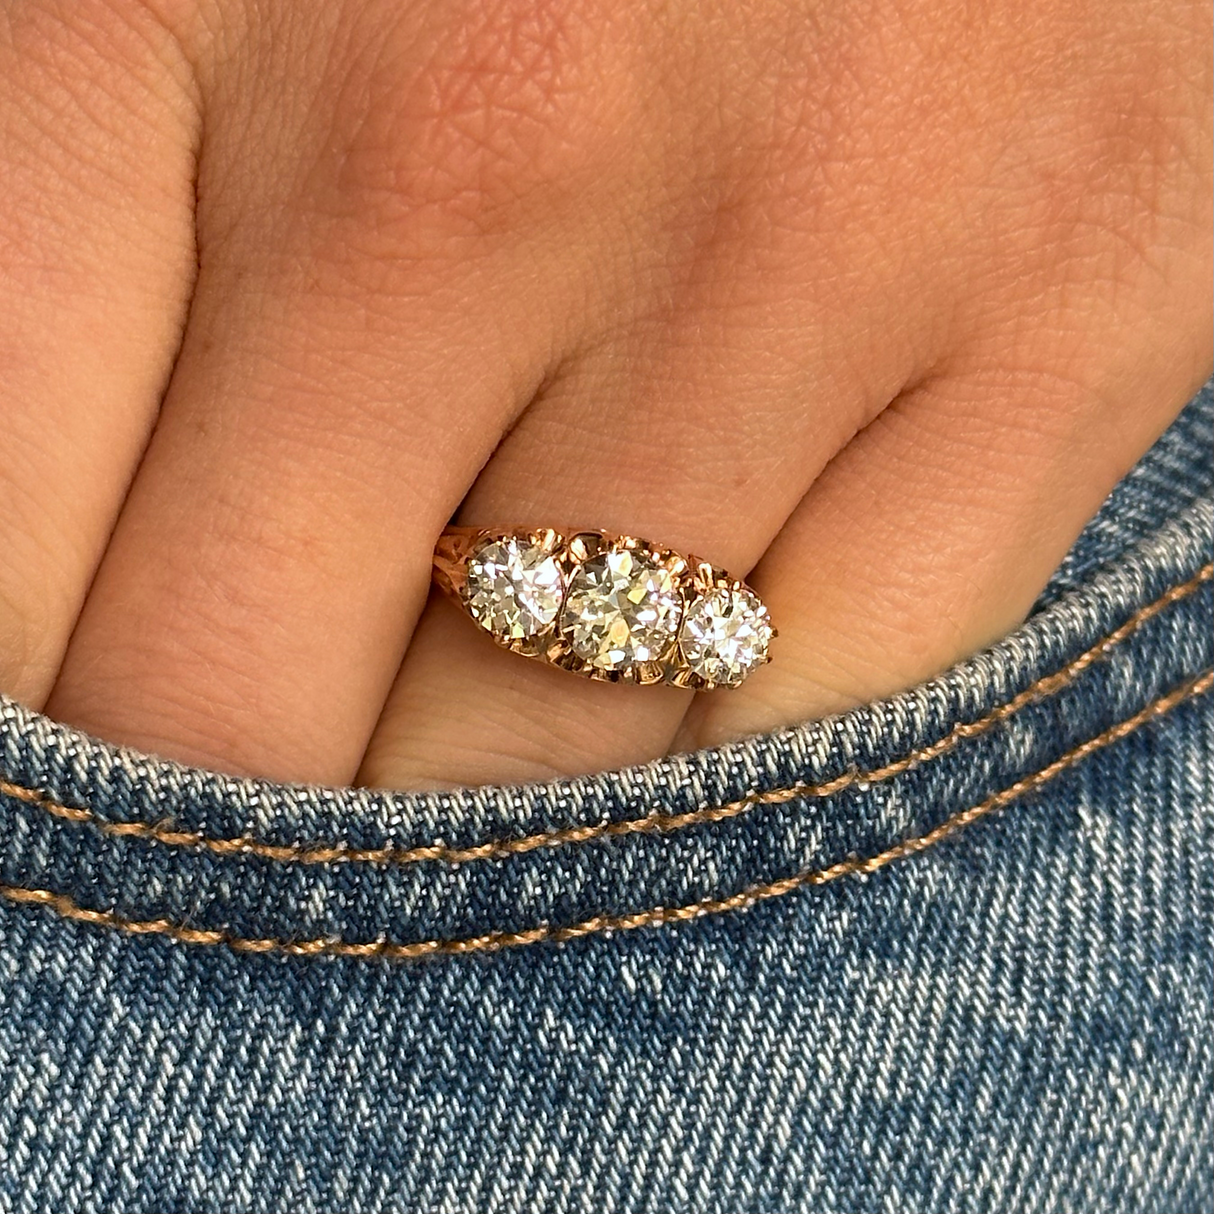 three stone antique italian diamond engagement ring, worn on hand and placed in pocket of denim jeans, front view. 